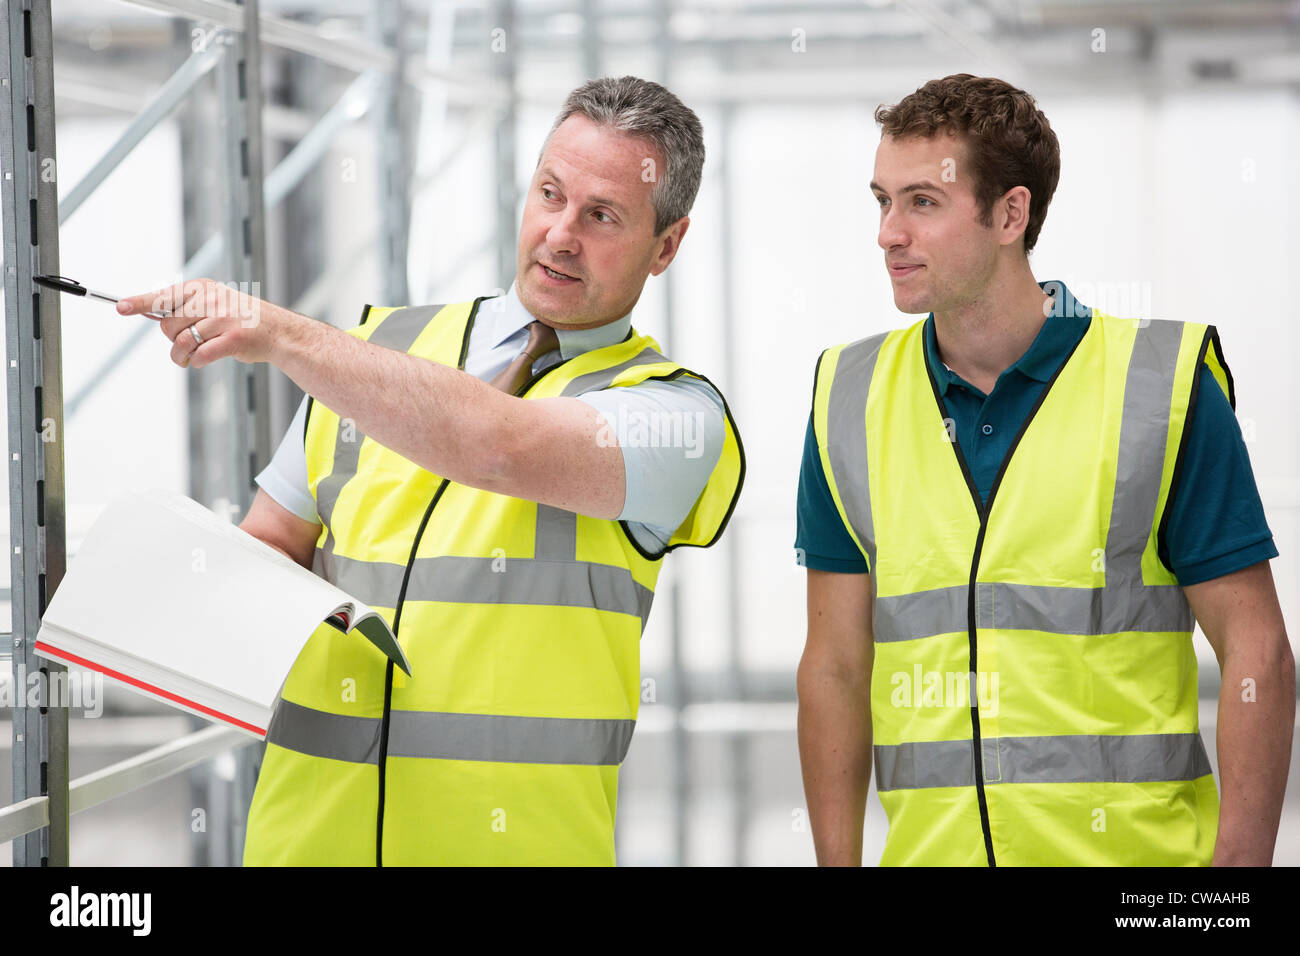 Two men in warehouse, one pointing with pen Stock Photo